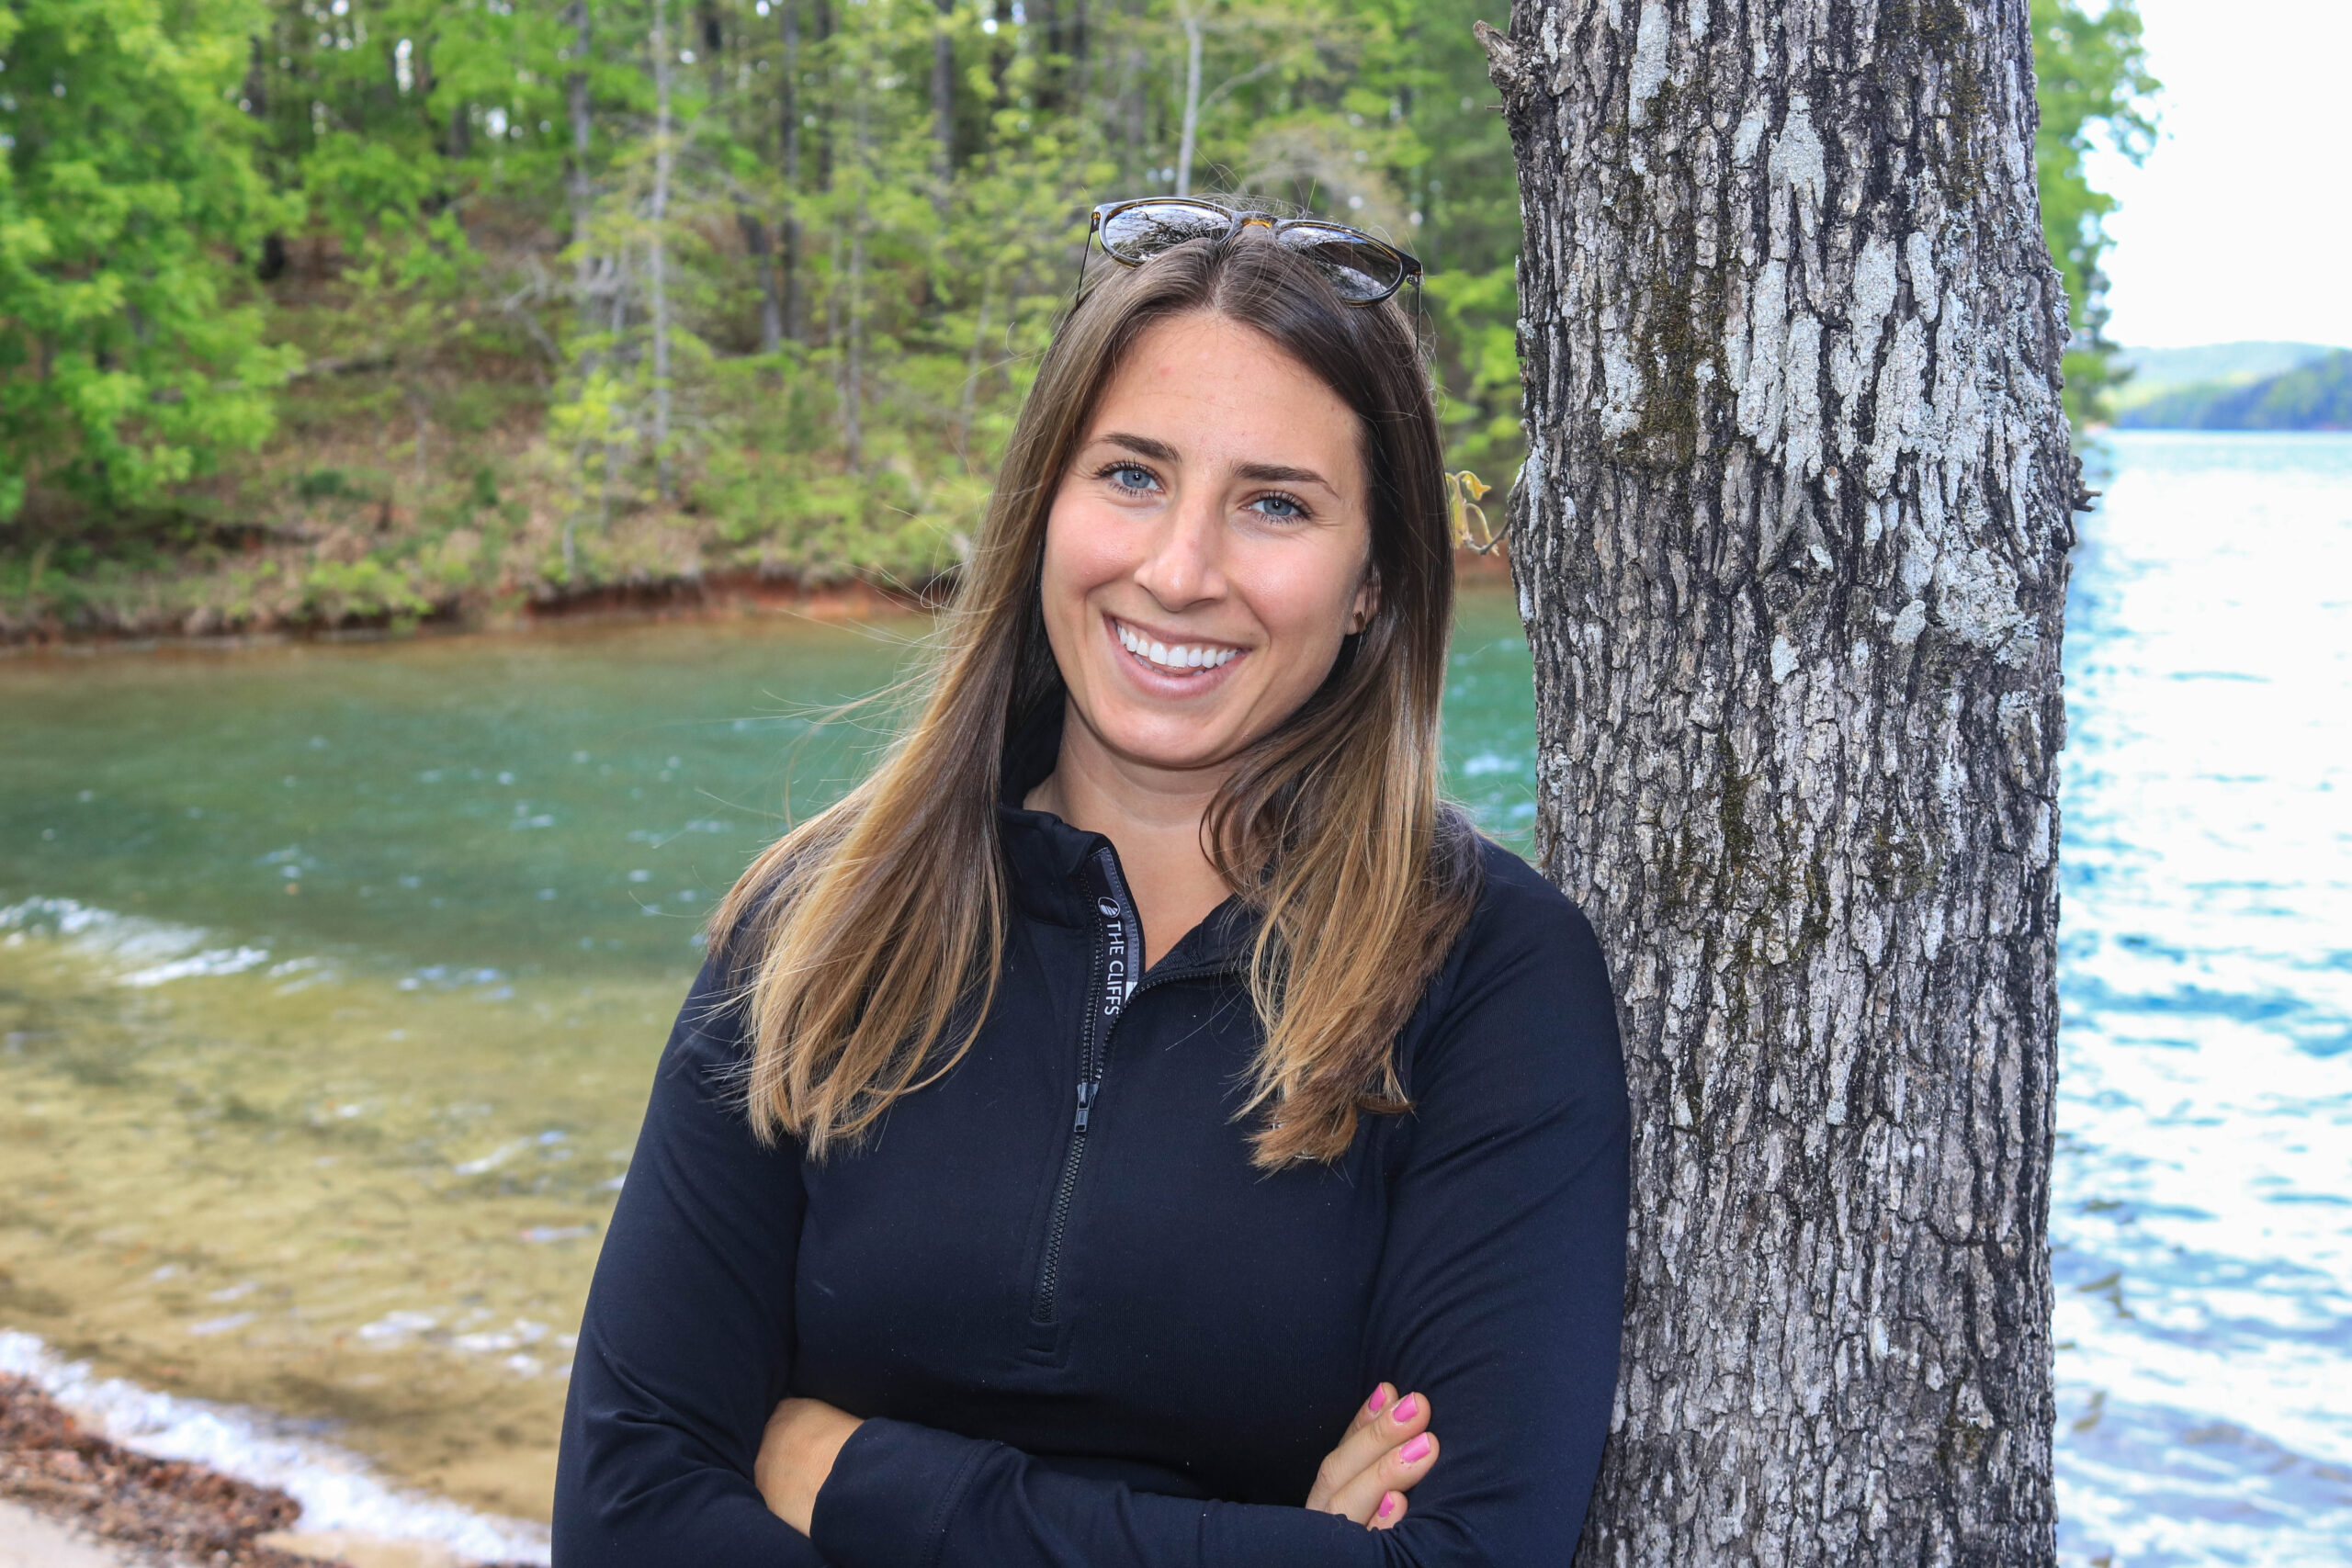 the cliffs director of outdoor pursuits